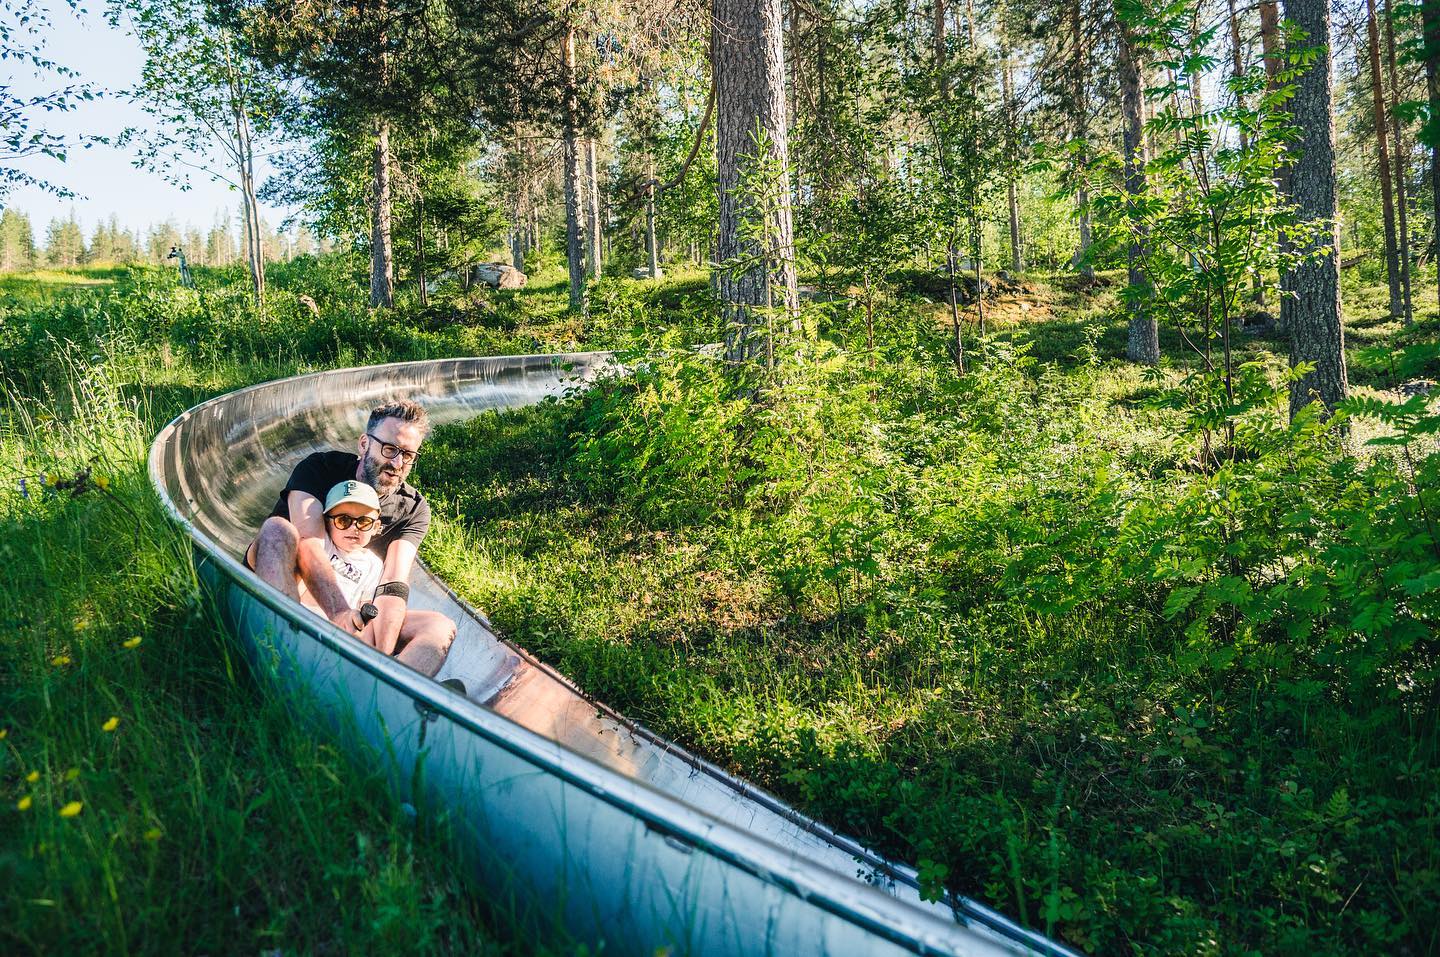 Sliding into the weekend! 

The scenery lift and summer sled track at @ounasvaaraskiresort are easy-access ways to discover the famous outdoor playground of many sports here in Rovaniemi, Lapland. 

#visitrovaniemi #rovaniemi #fast #weekend #outdoorculture #lapland #summer2022 #arcticsummer #visitfinland